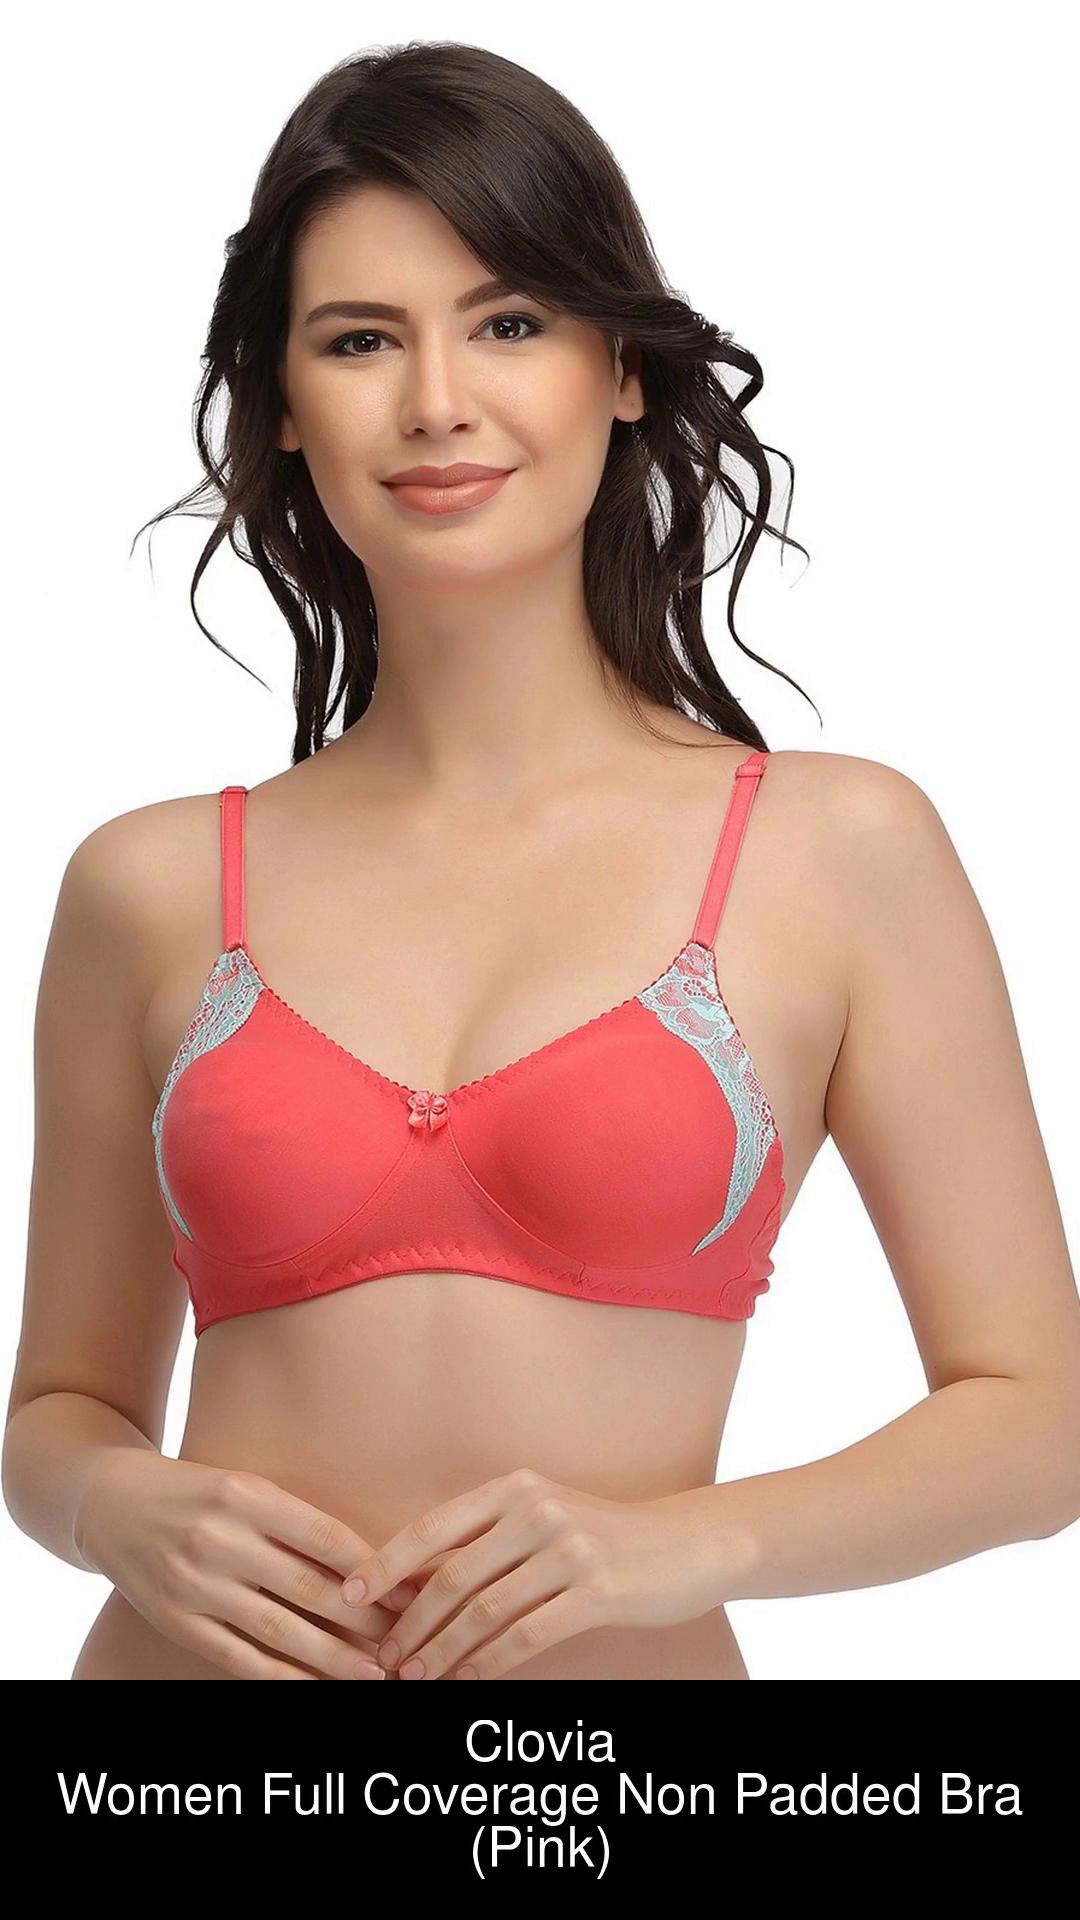 Clovia Non-Padded Bra With Lace Cups In Pink Women Full Coverage